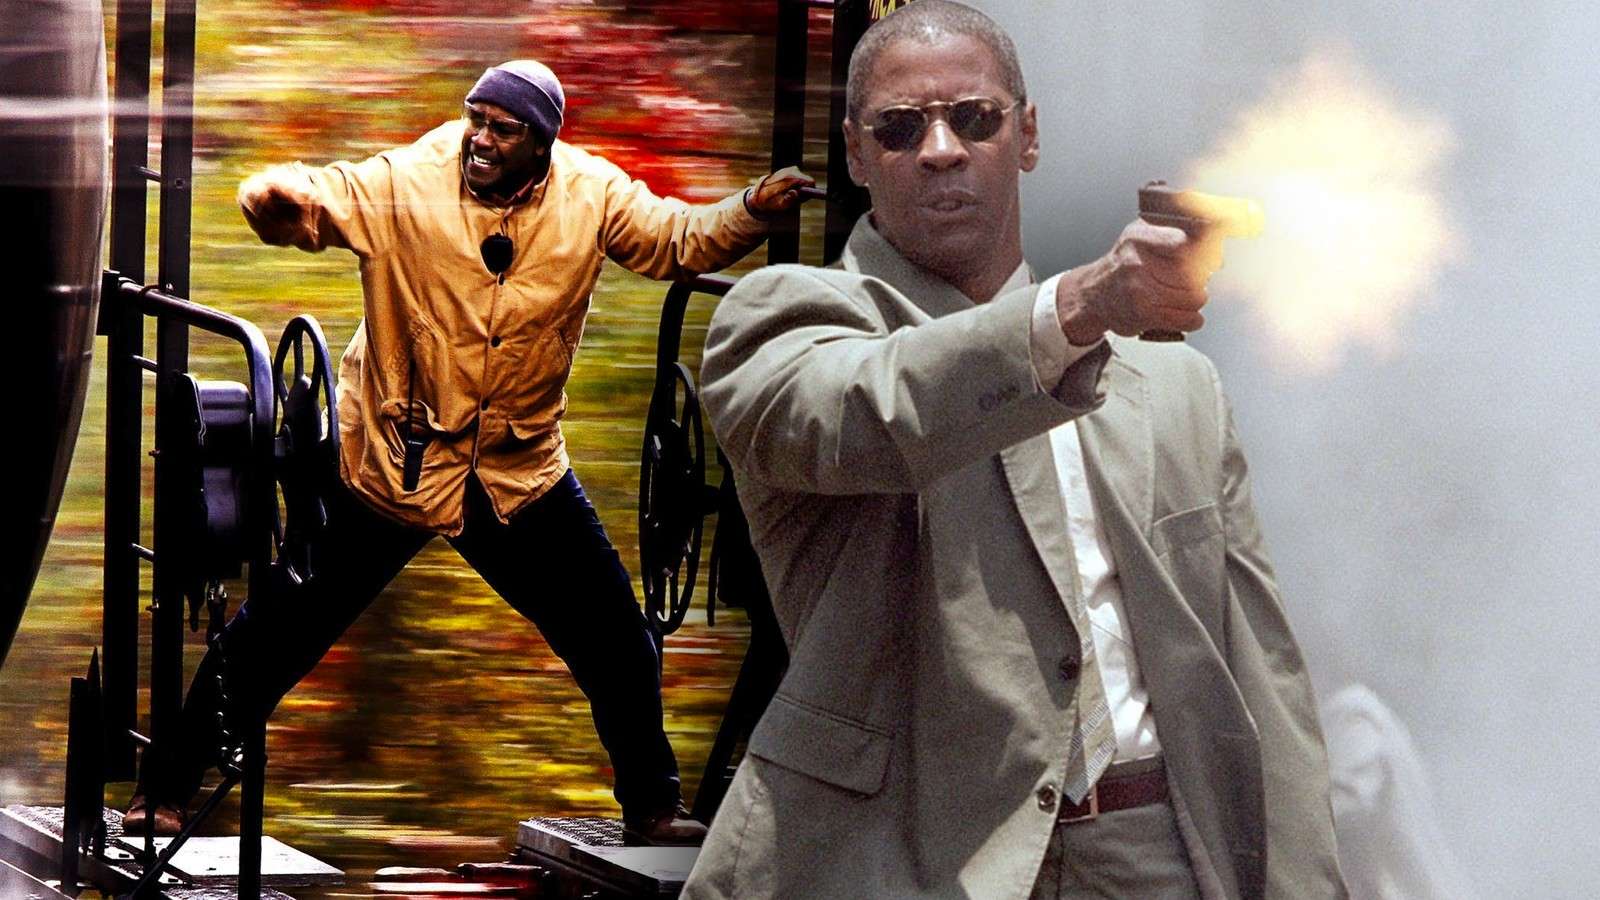 Denzel Washington in Unstoppable and Man on Fire